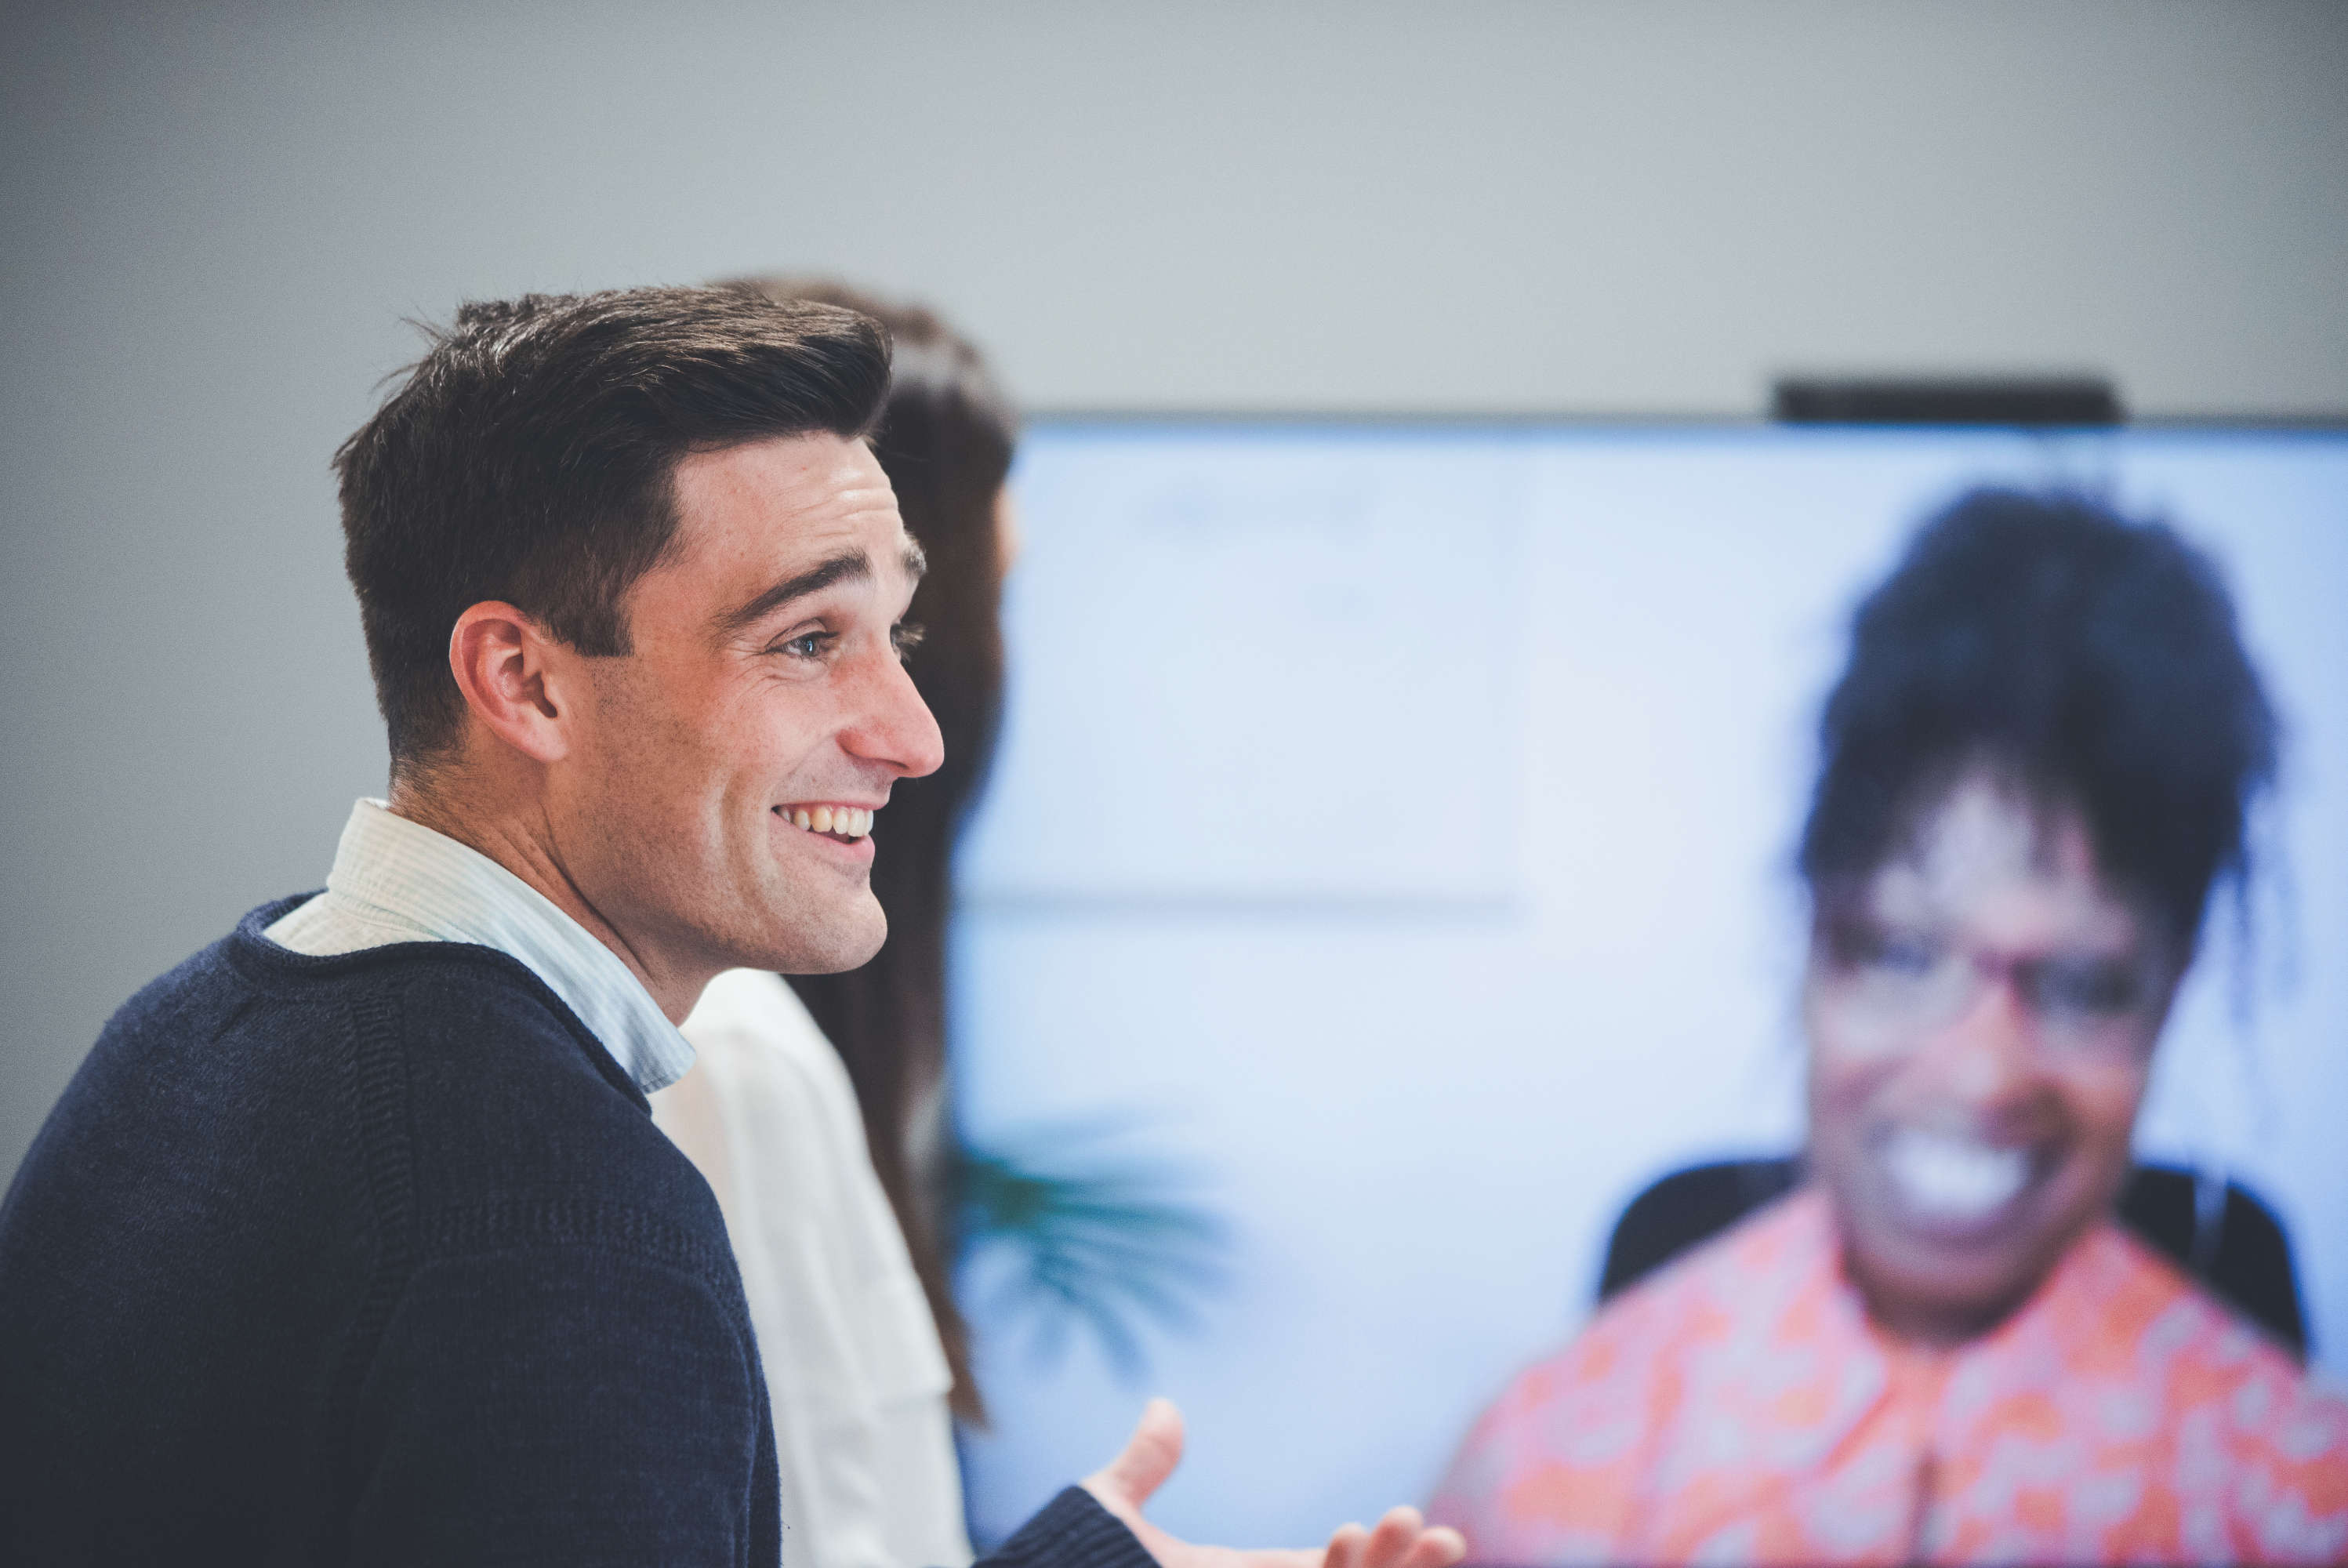 Senior client manager smiles and talks with a colleague out of frame during a group video call with other team members.